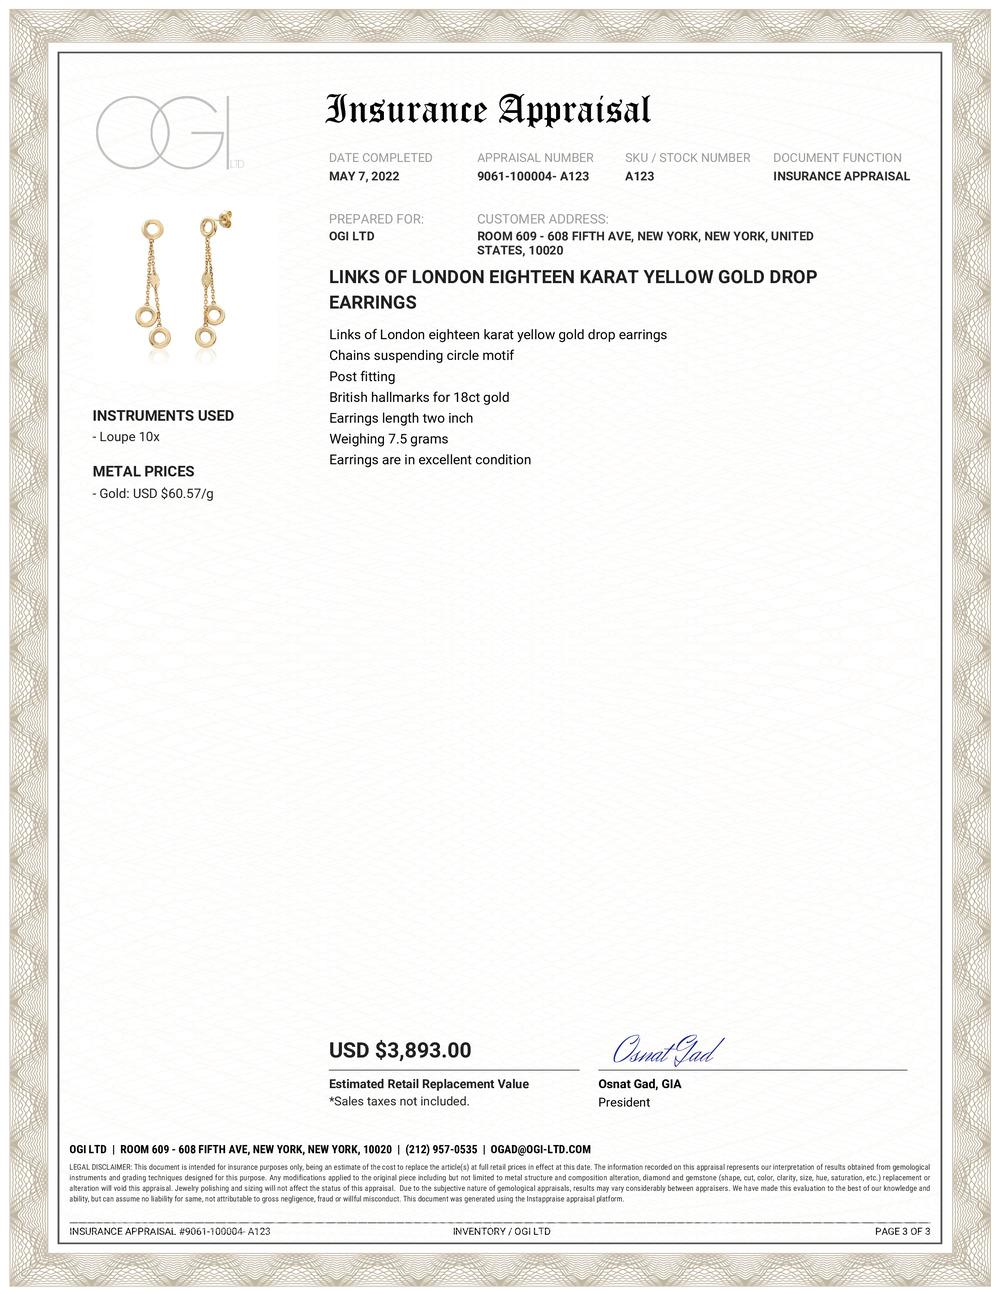 Vintage Links of London chains suspending circle motif 18 karat yellow gold drop earrings.
Links of London is a British jewelry brand founded in 1990 by Annoushka Ducas and her husband John Ayton. They specialize in producing high-quality jewelry